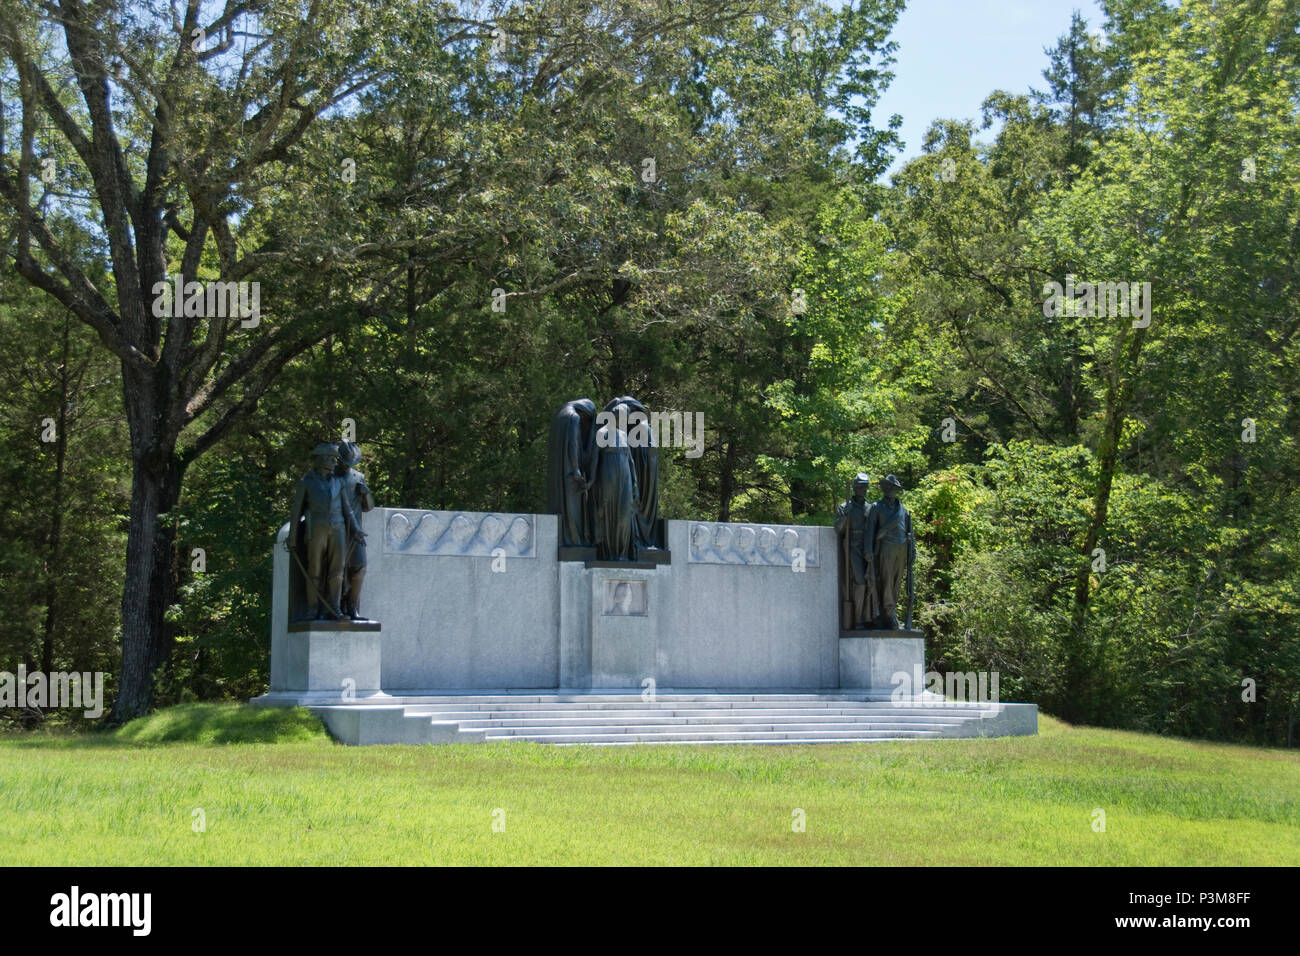 The Confederate Memorial “Defeated Victory” (erected 1917 / public domain) at Shiloh National Military Park, Shiloh, Tennessee. Stock Photo